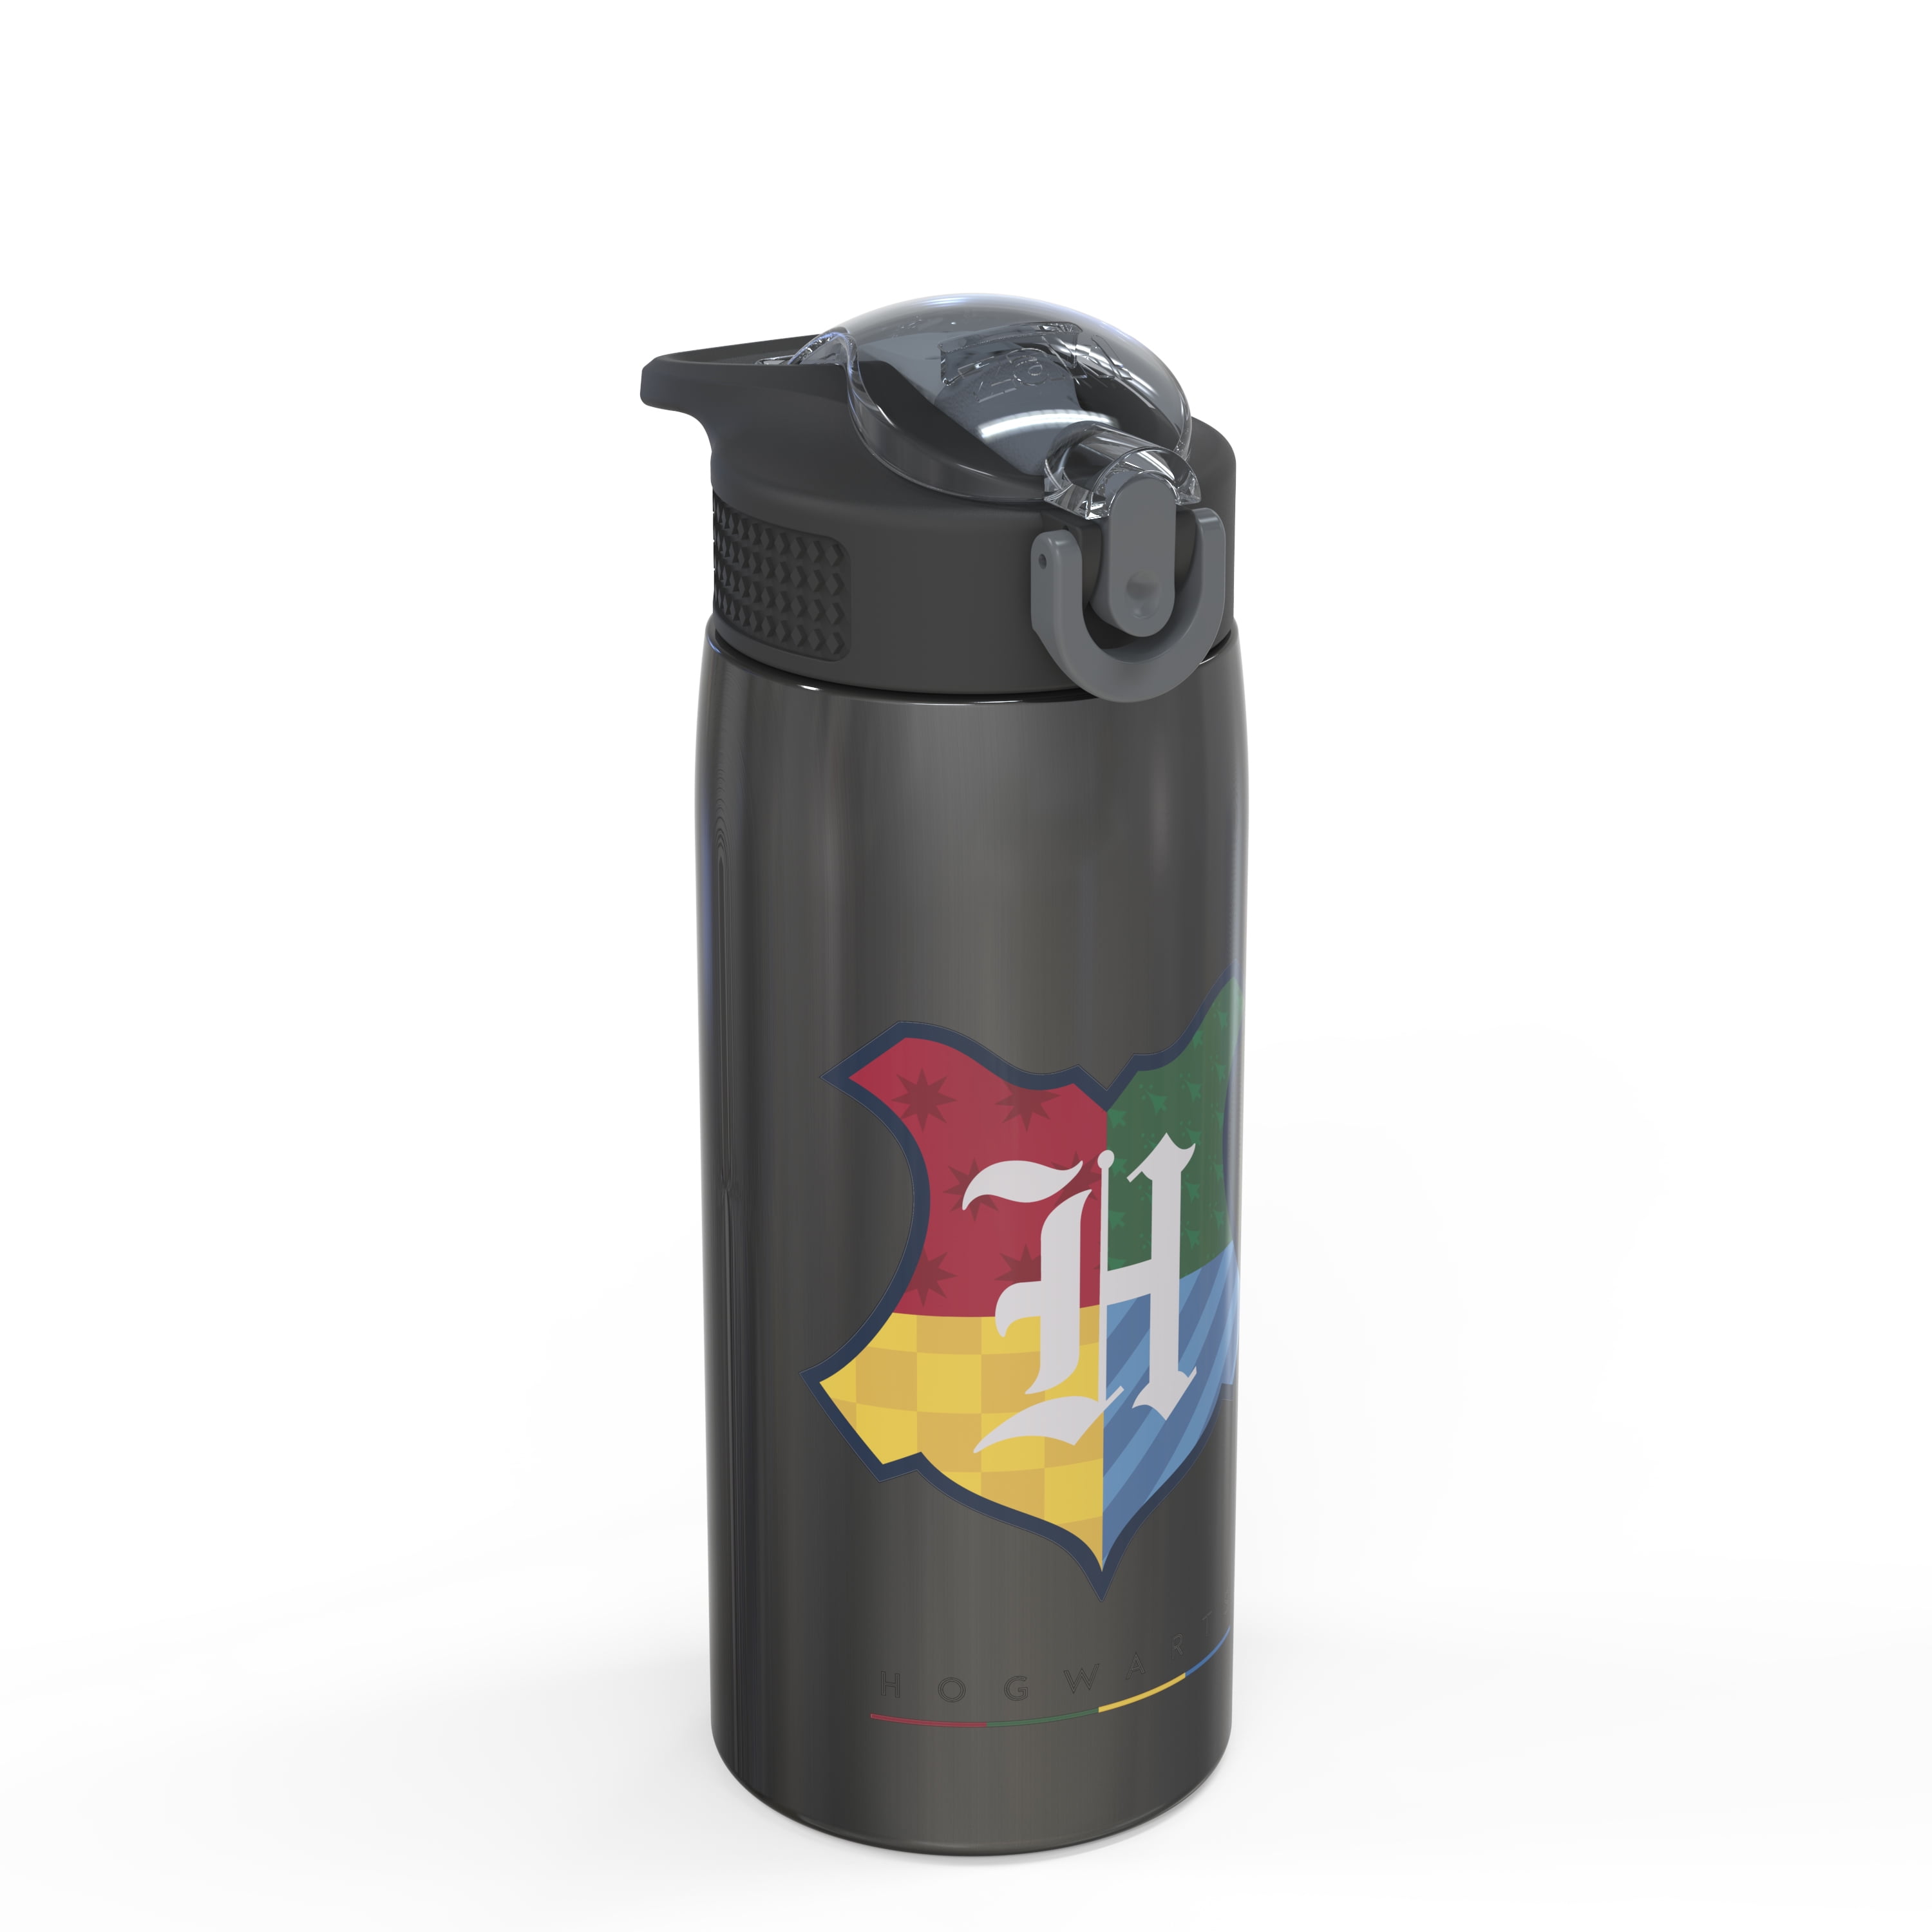 Zak Designs 20oz Stainless Steel Kids' Water Bottle with Antimicrobial Spout 'Harry Potter